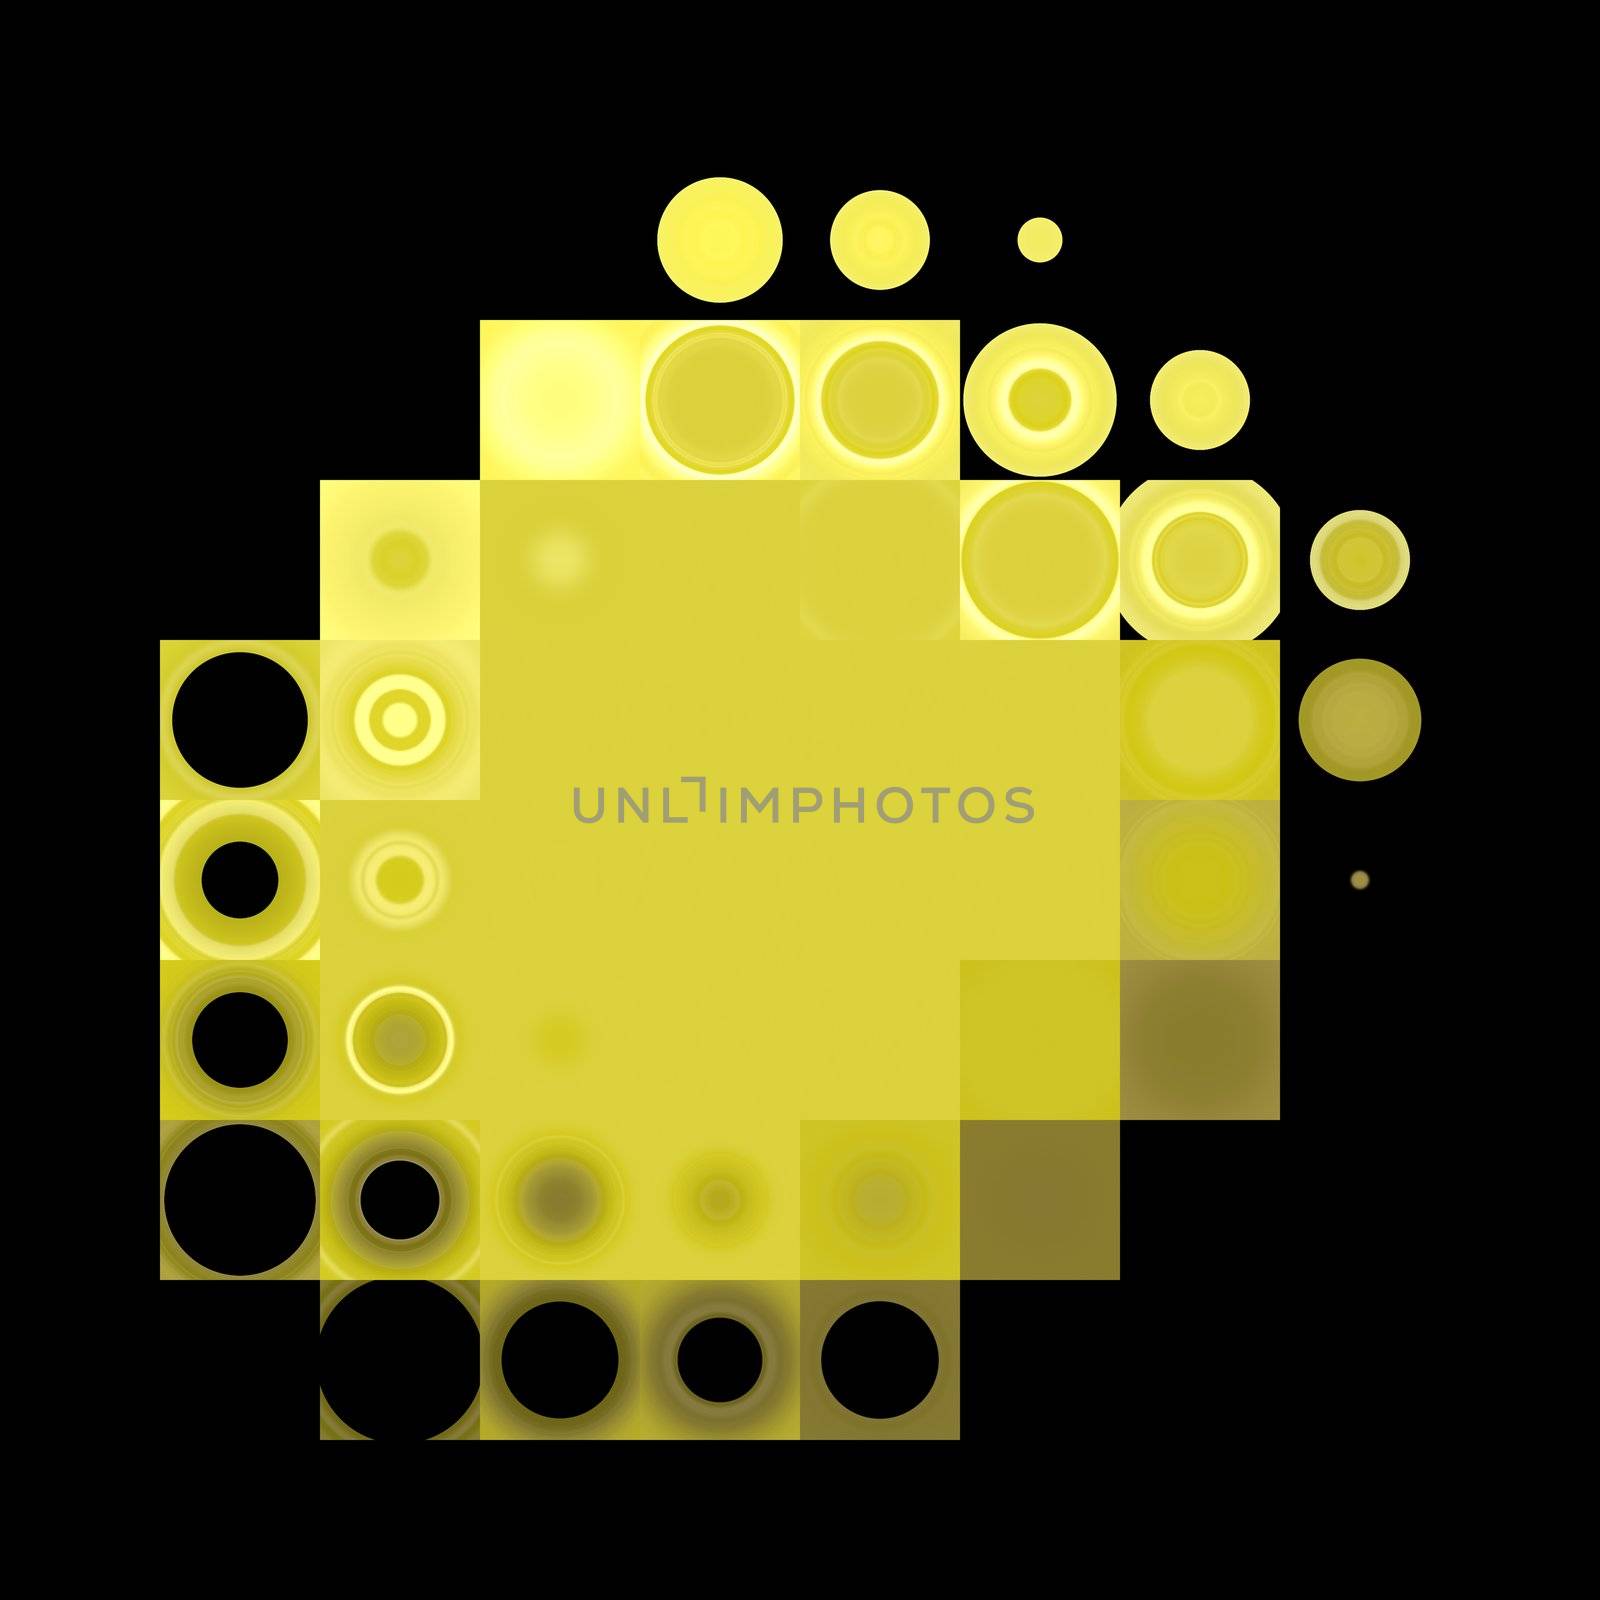 texture of bright yellow spots and blocks on black